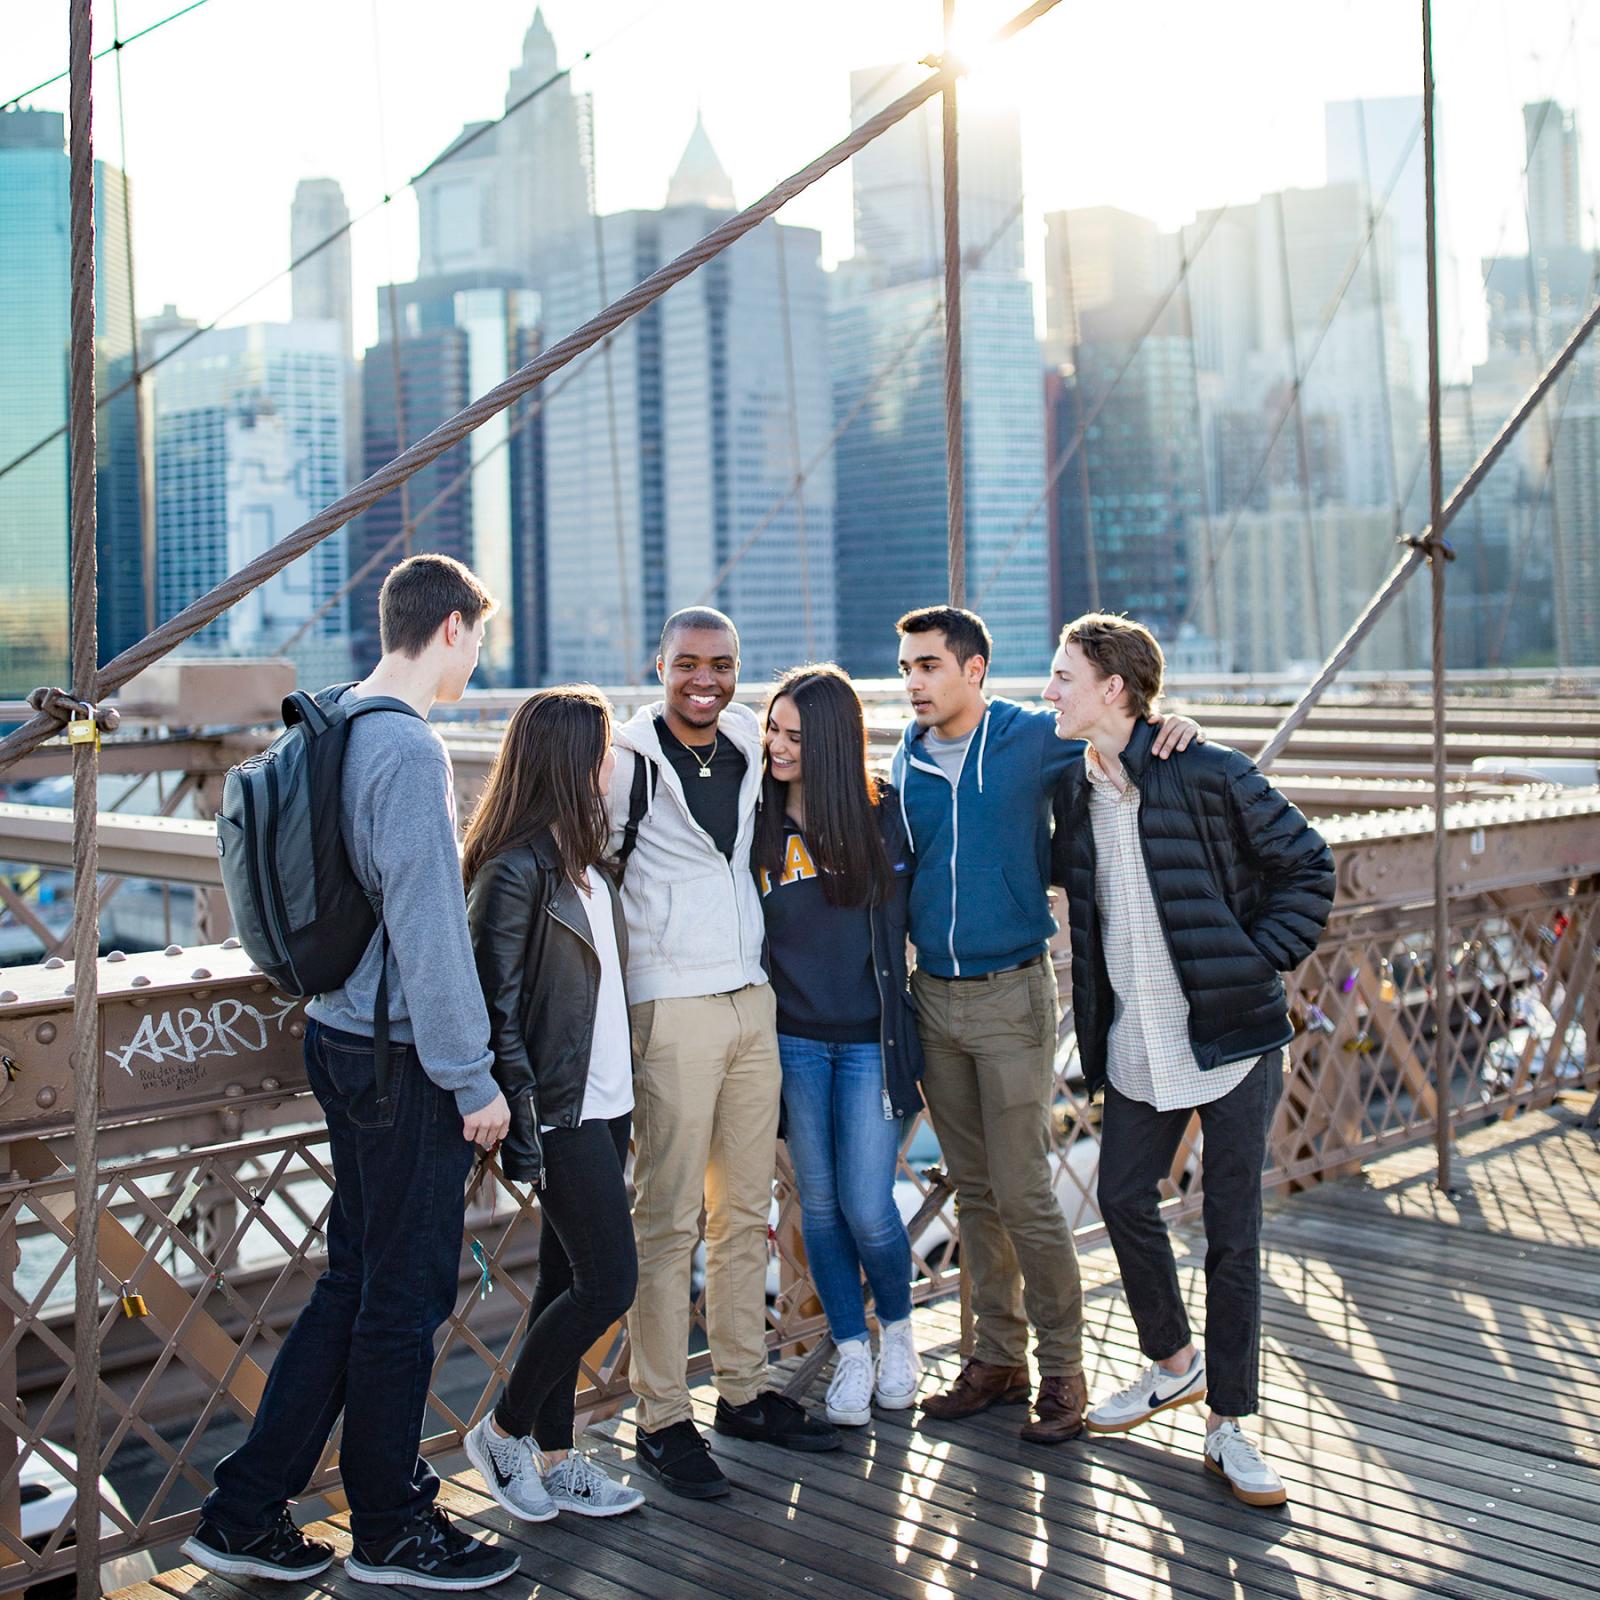 Pace students at the Brooklyn Bridge